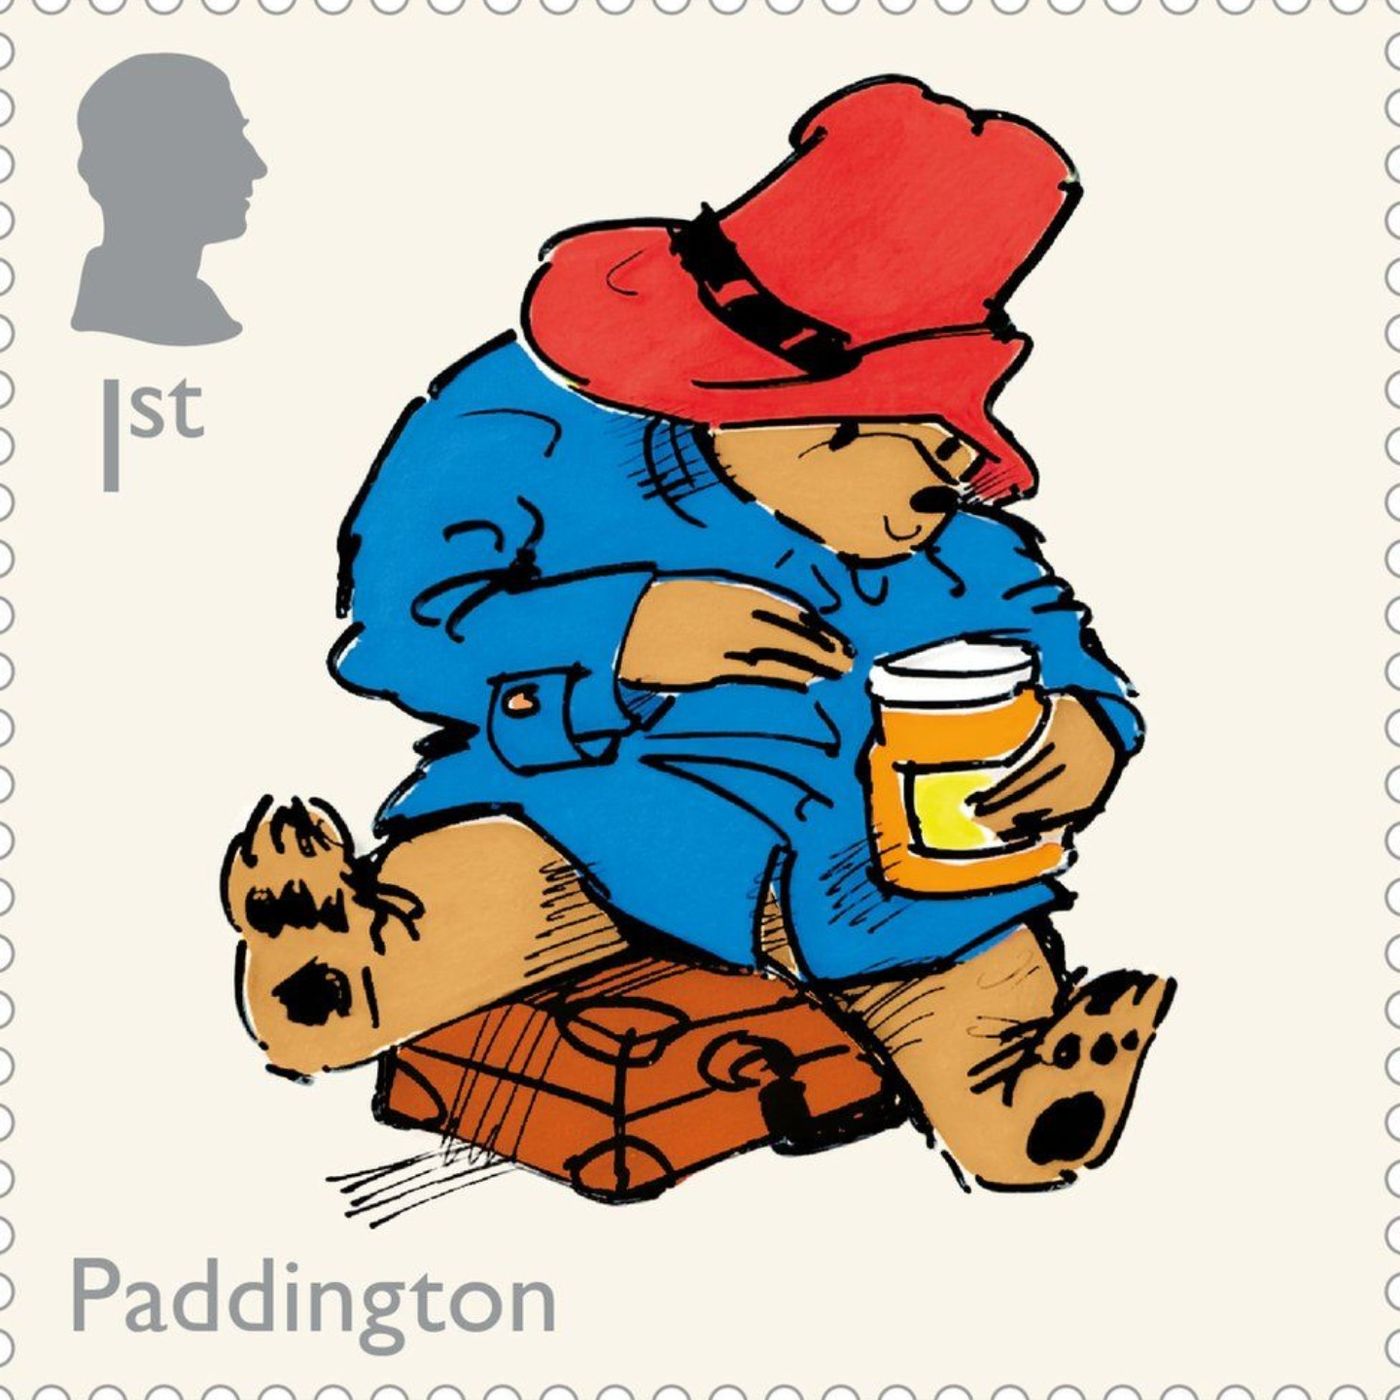 Paddington Bear stamps released by Royal Mail